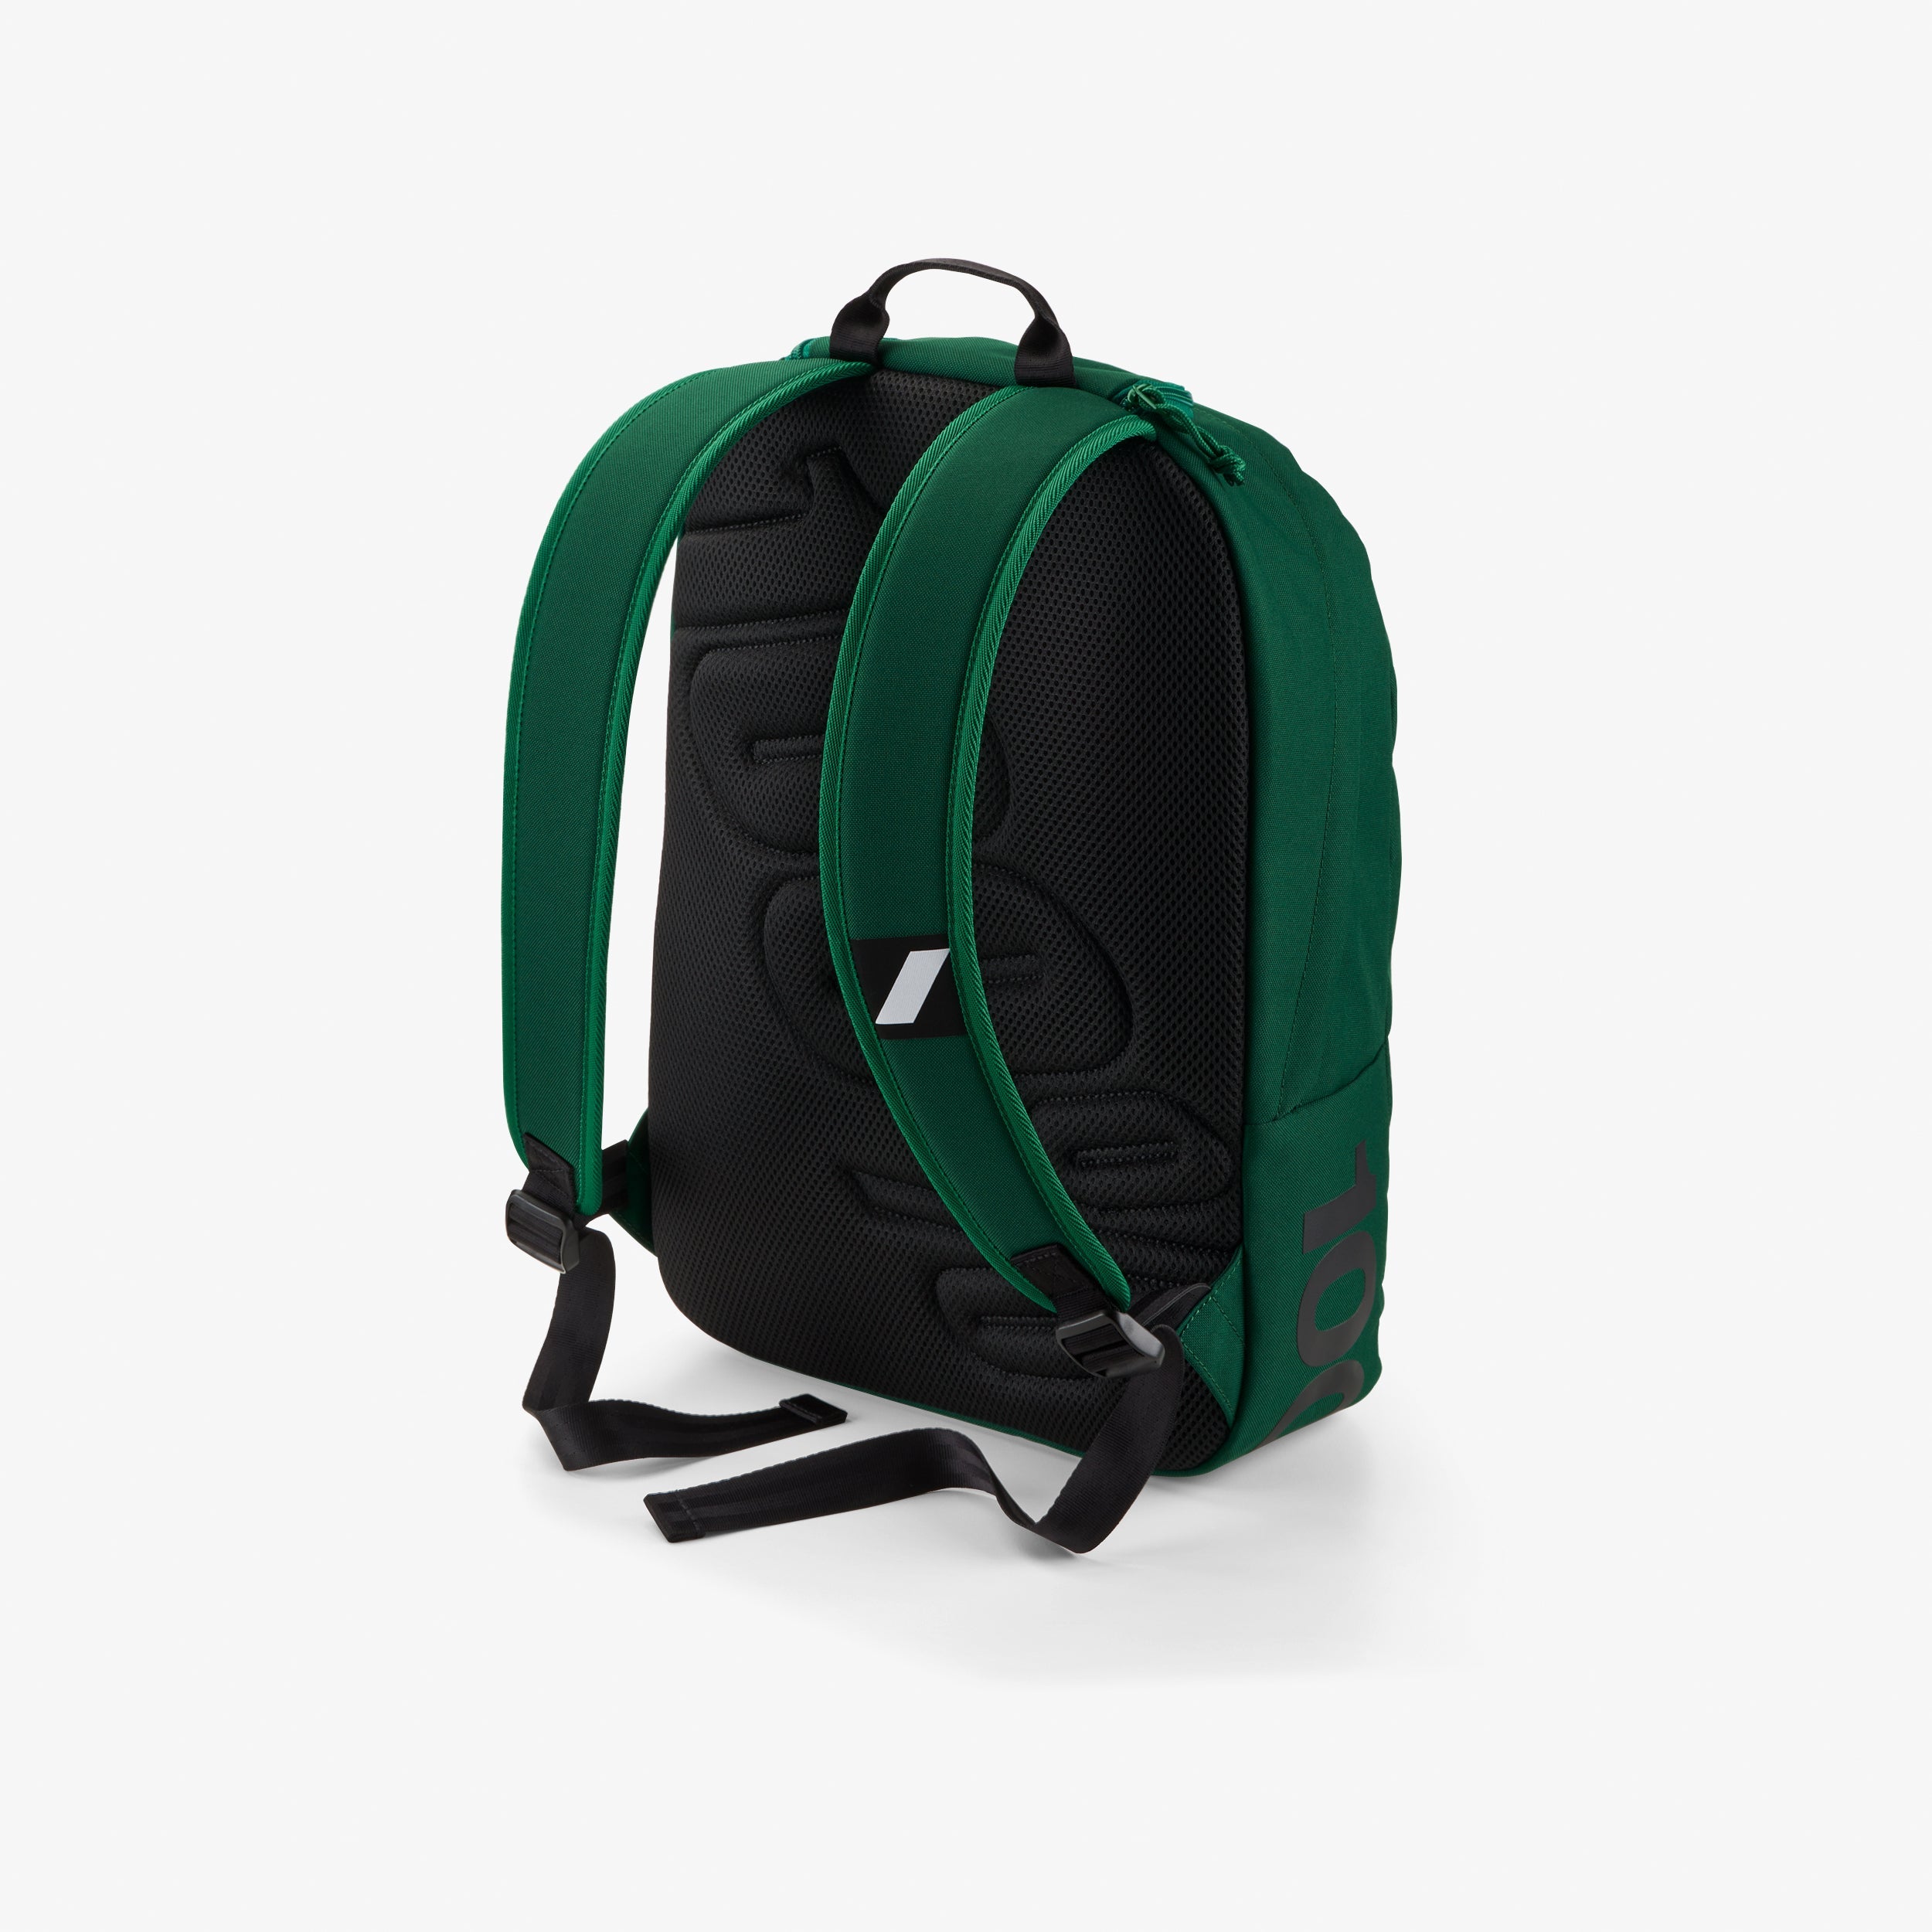 SKYCAP Backpack Forest - Secondary